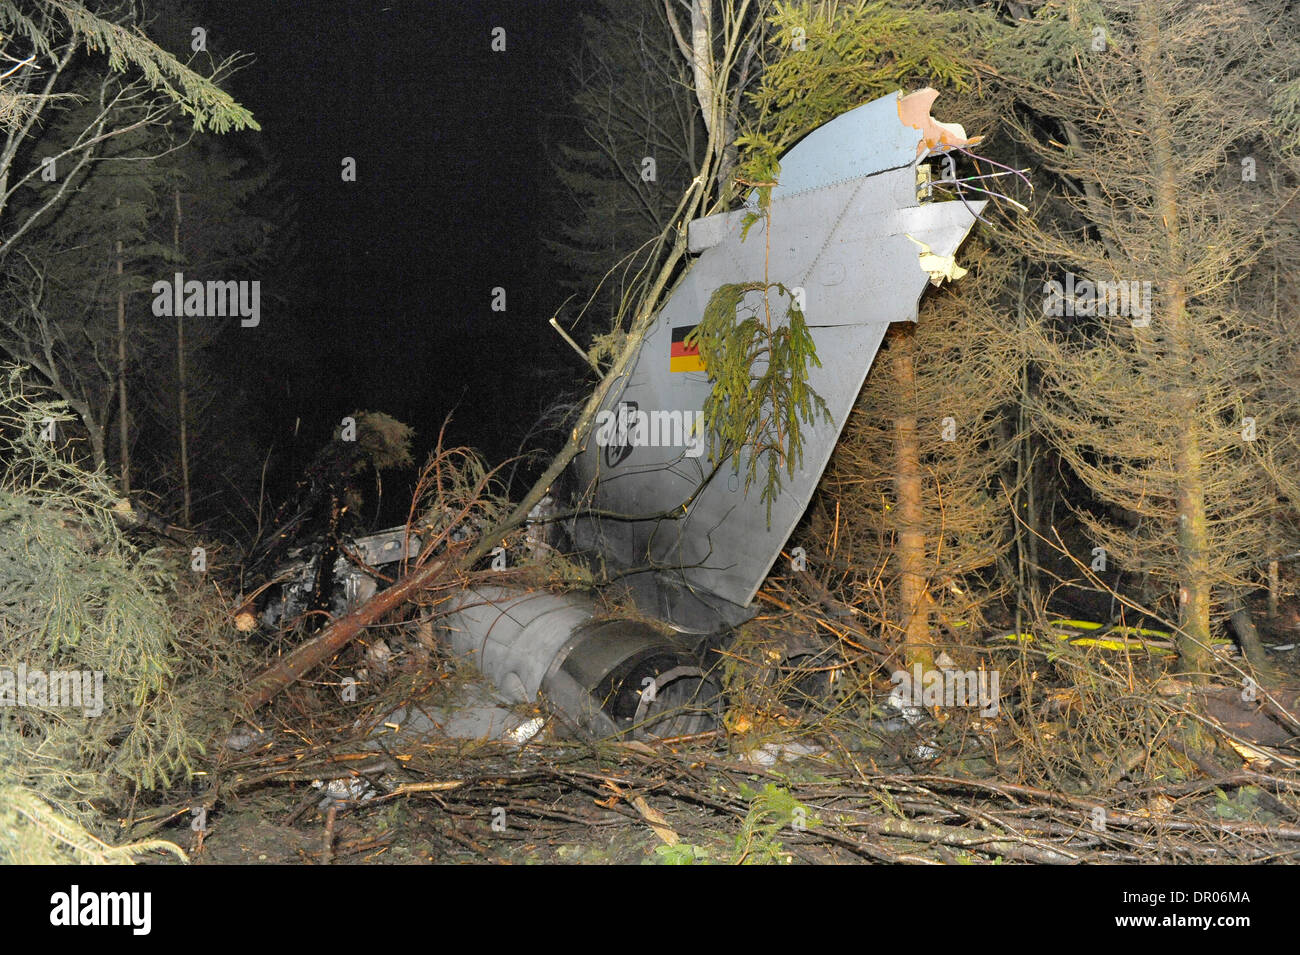 Kaisersesch, Germany. 16th Jan, 2014. Debris from the crash of a German Air Force Tornado fighter jet near Autobahn A48 near Kaisersesch, Germany, 16 January 2014. The pilot and copilot were able to eject before the plane crashed. Photo: Thomas Frey/dpa/Alamy Live News Stock Photo